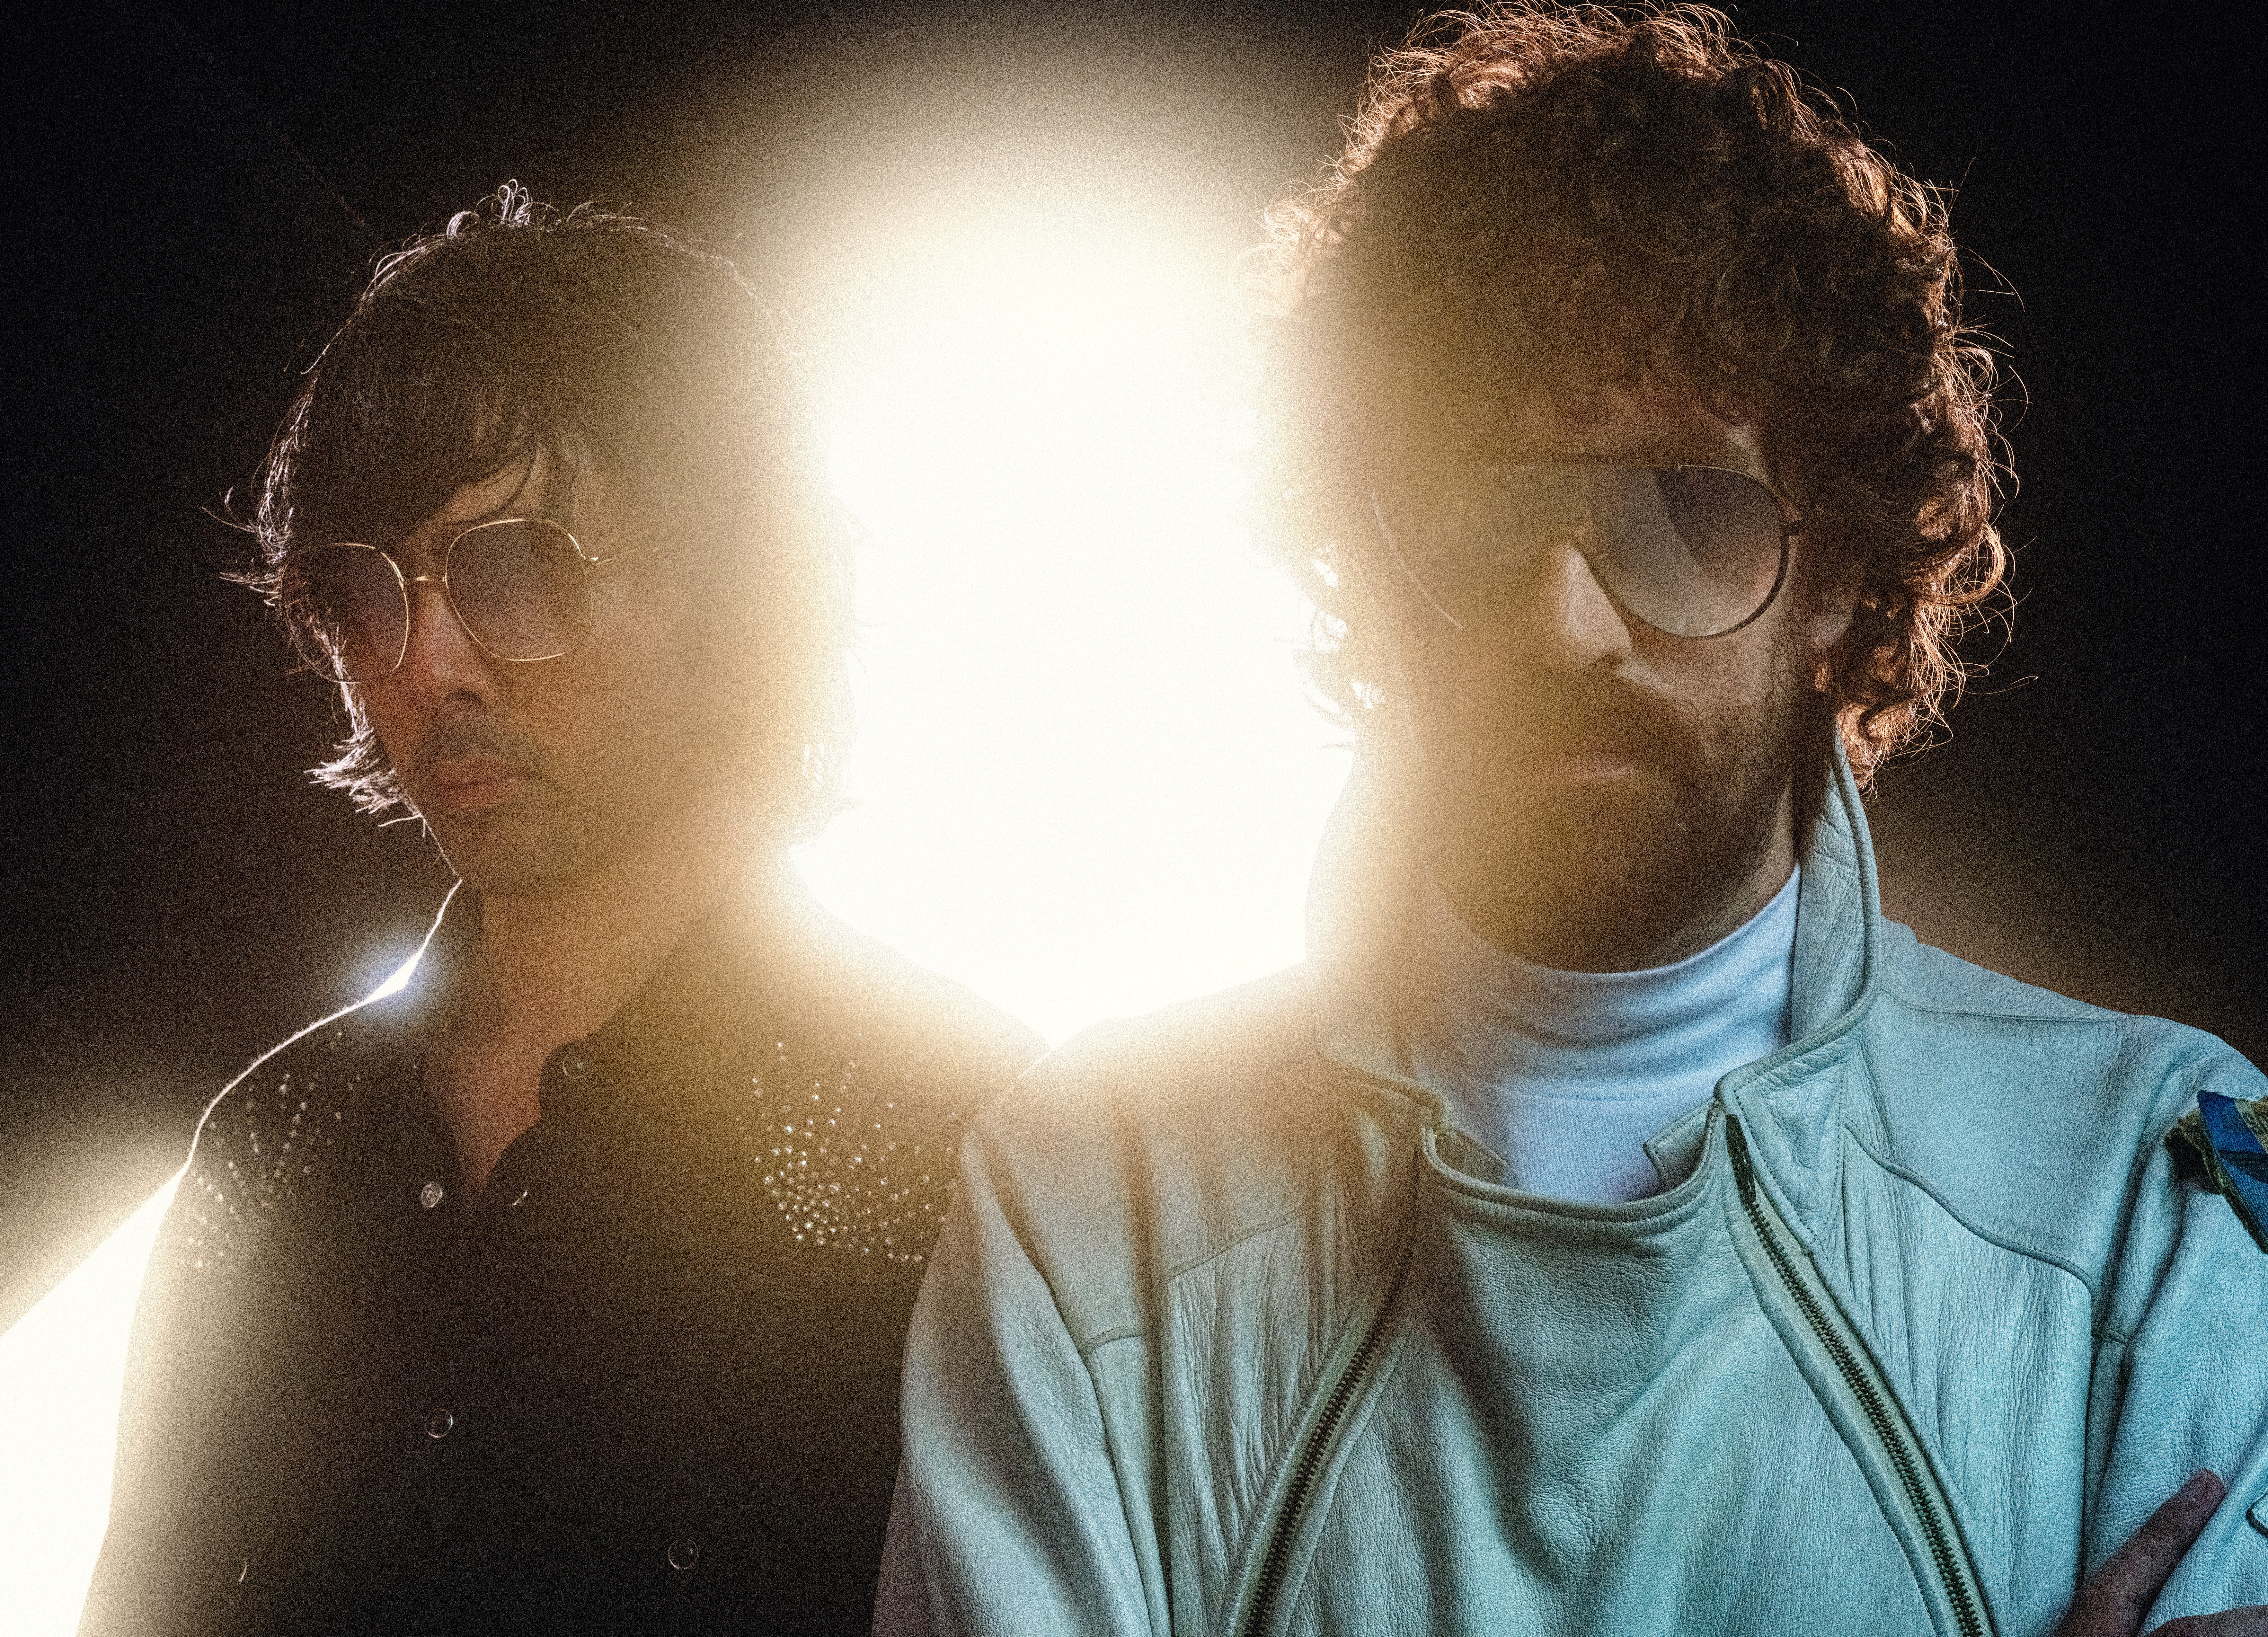 Justice Came Back Just in Time for the Indie Sleaze Revival, but They Didn’t Plan It That Way